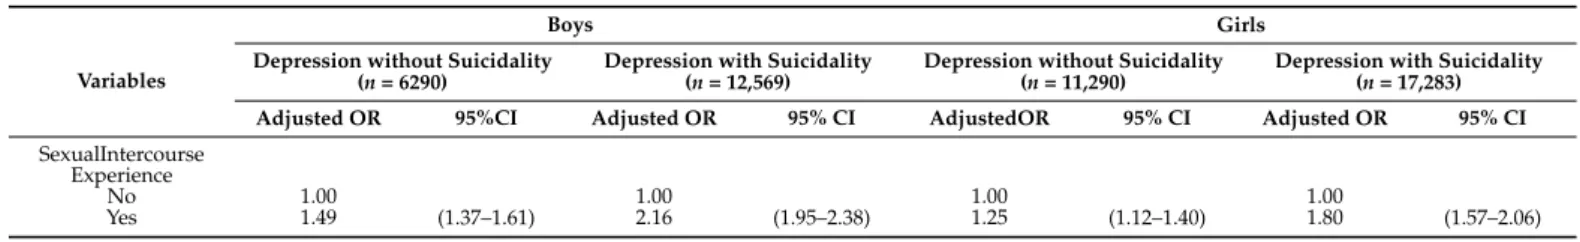 Table 4. Subgroup analysis of the association between depression with/without suicidality and sexual behavior.